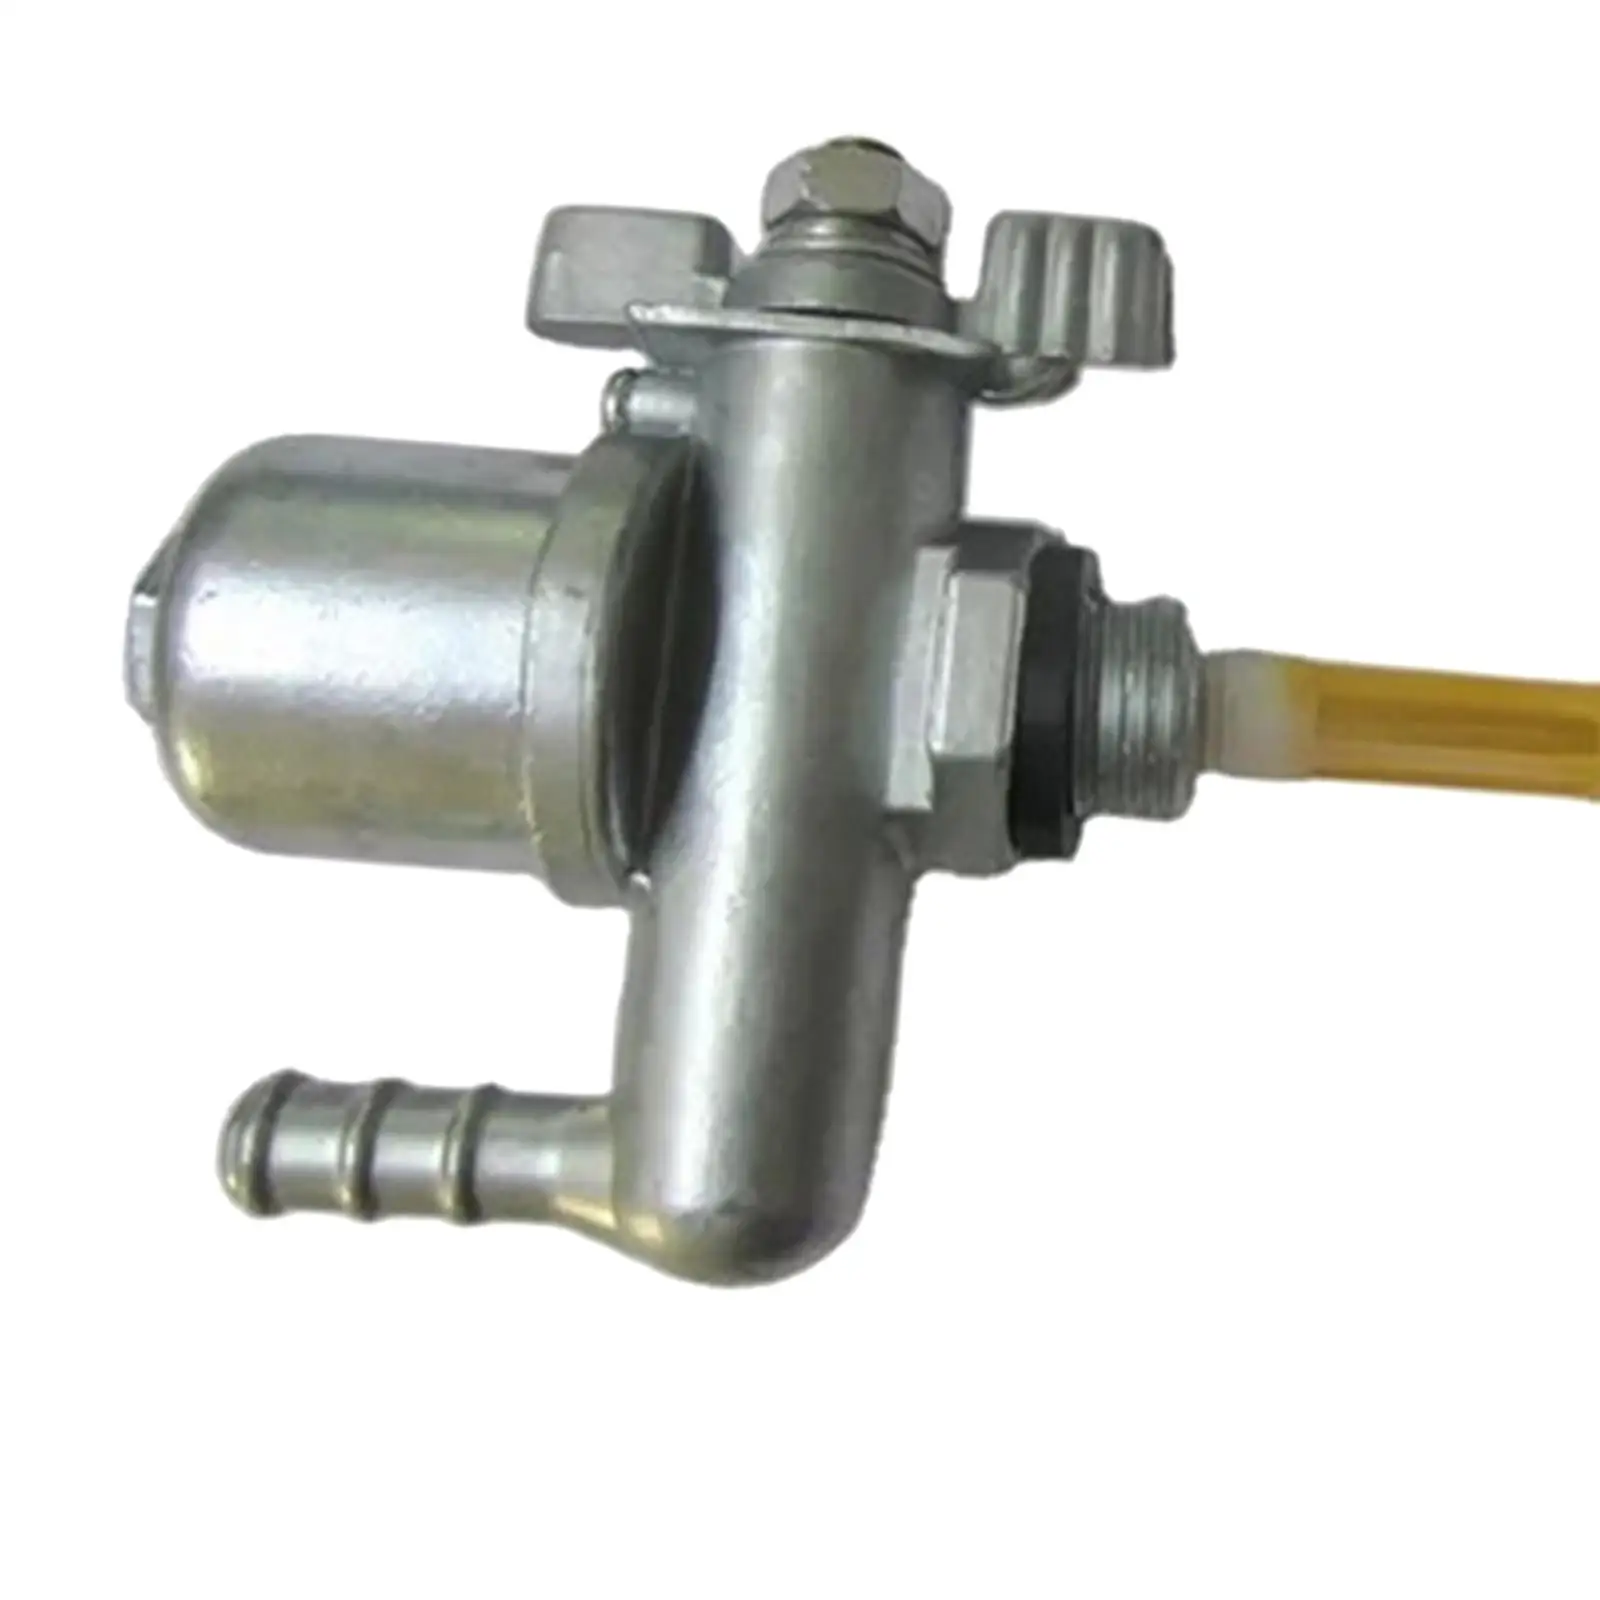 Motorcycle Fuel Gas Tank Switch Valve Petcock Replace for Ruassia Msk